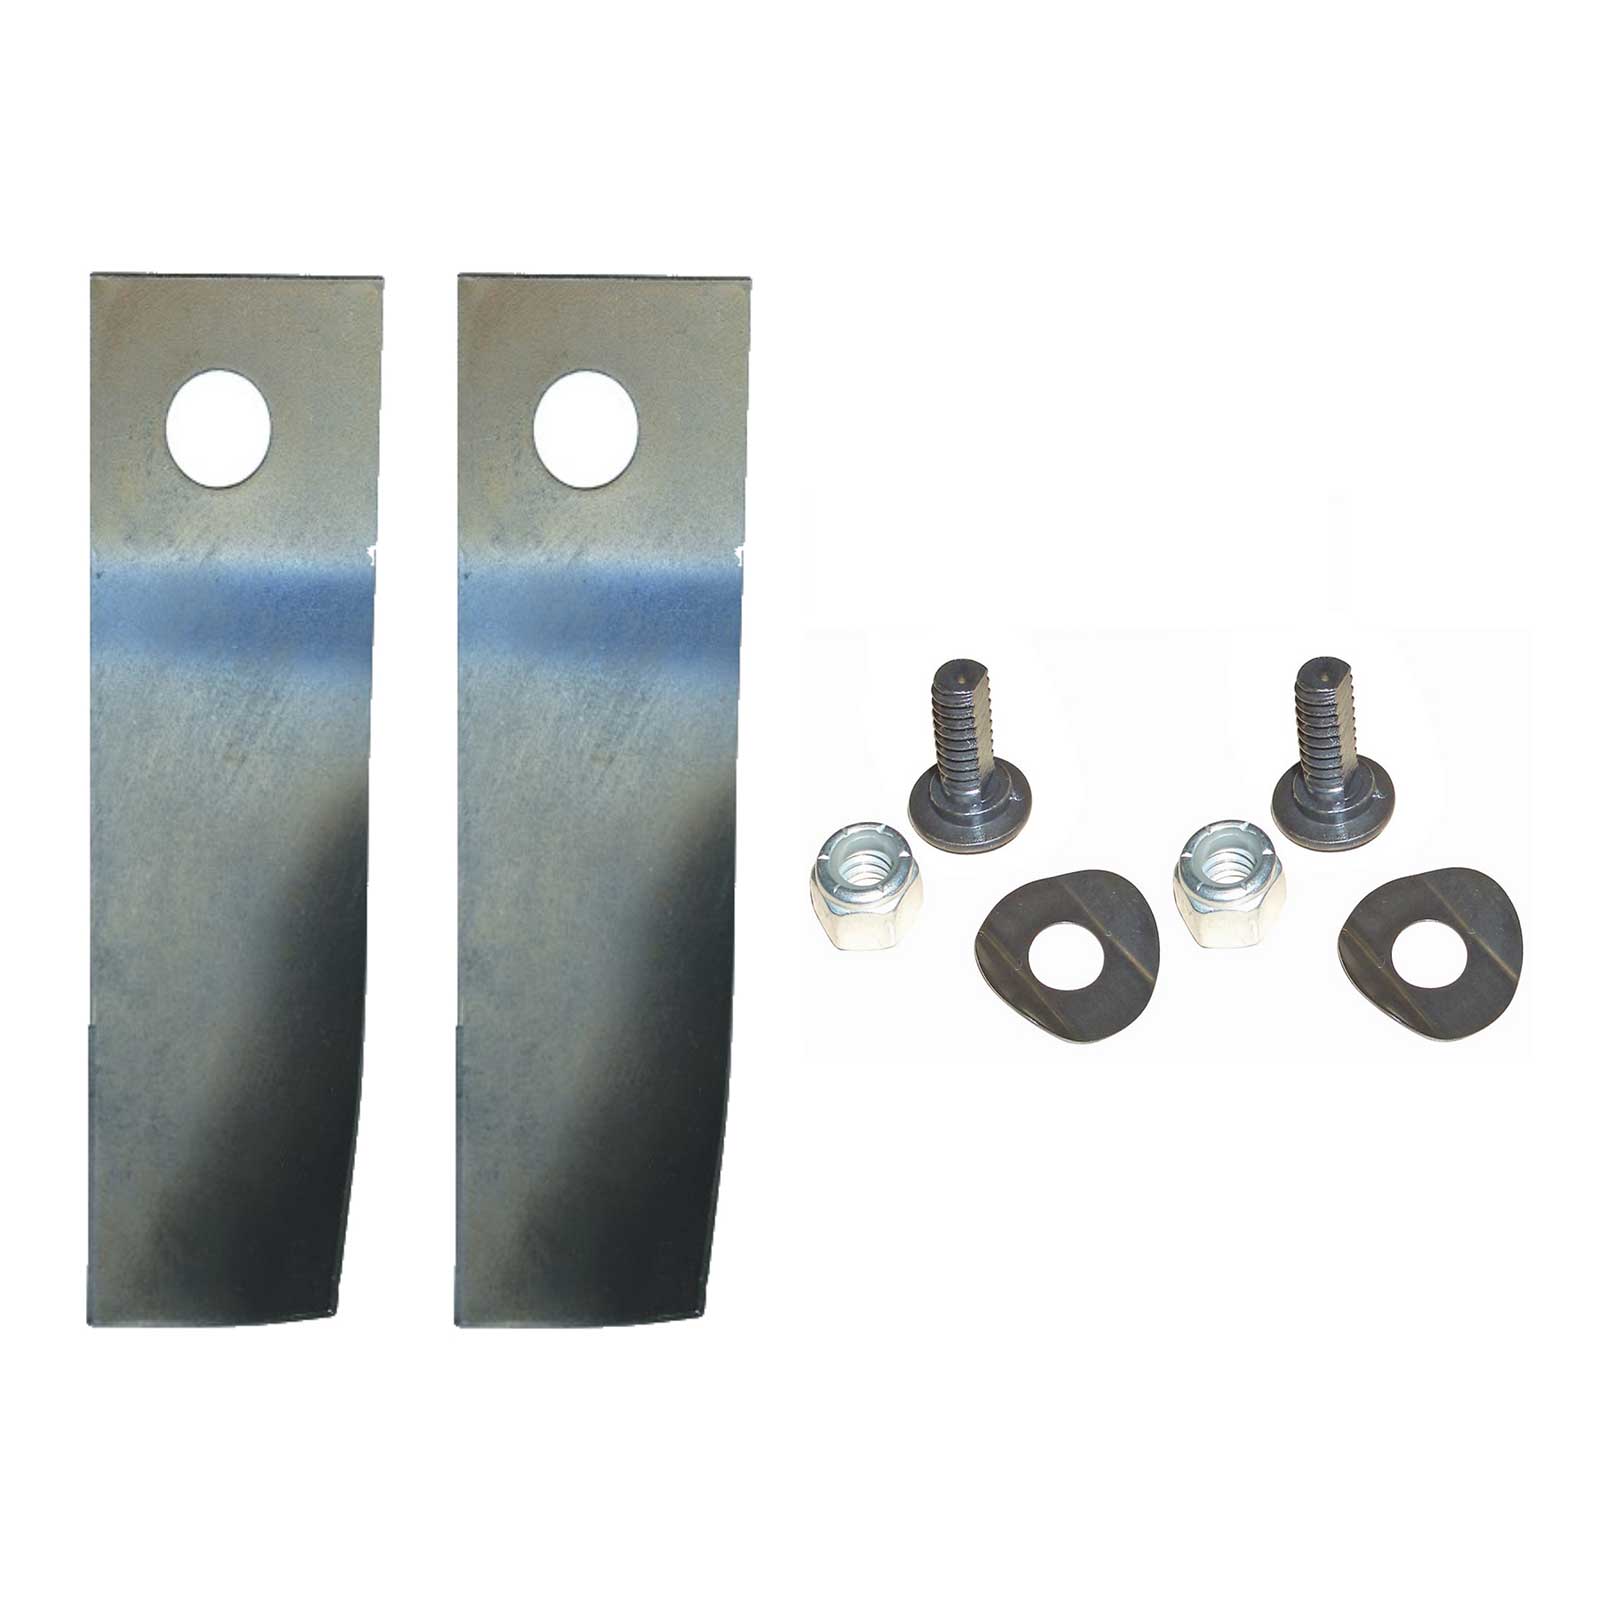 2x Lawn Mower Blades And Bolts Set For 18 Cox Crusader And Rover